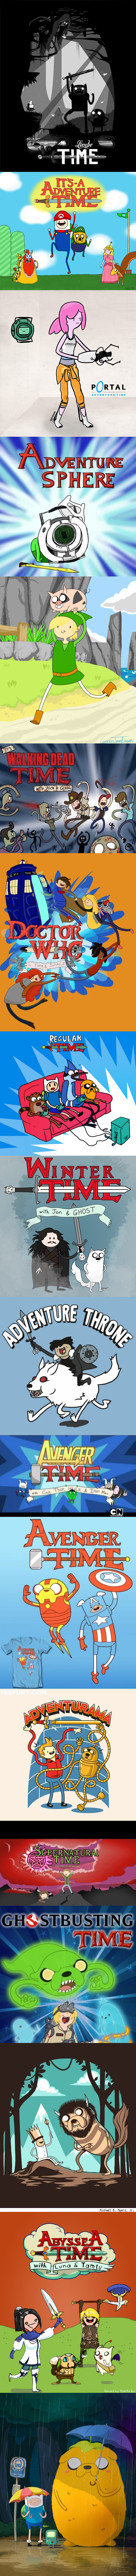 Adventure Time Crossovers. Credit to the awesome creators!.